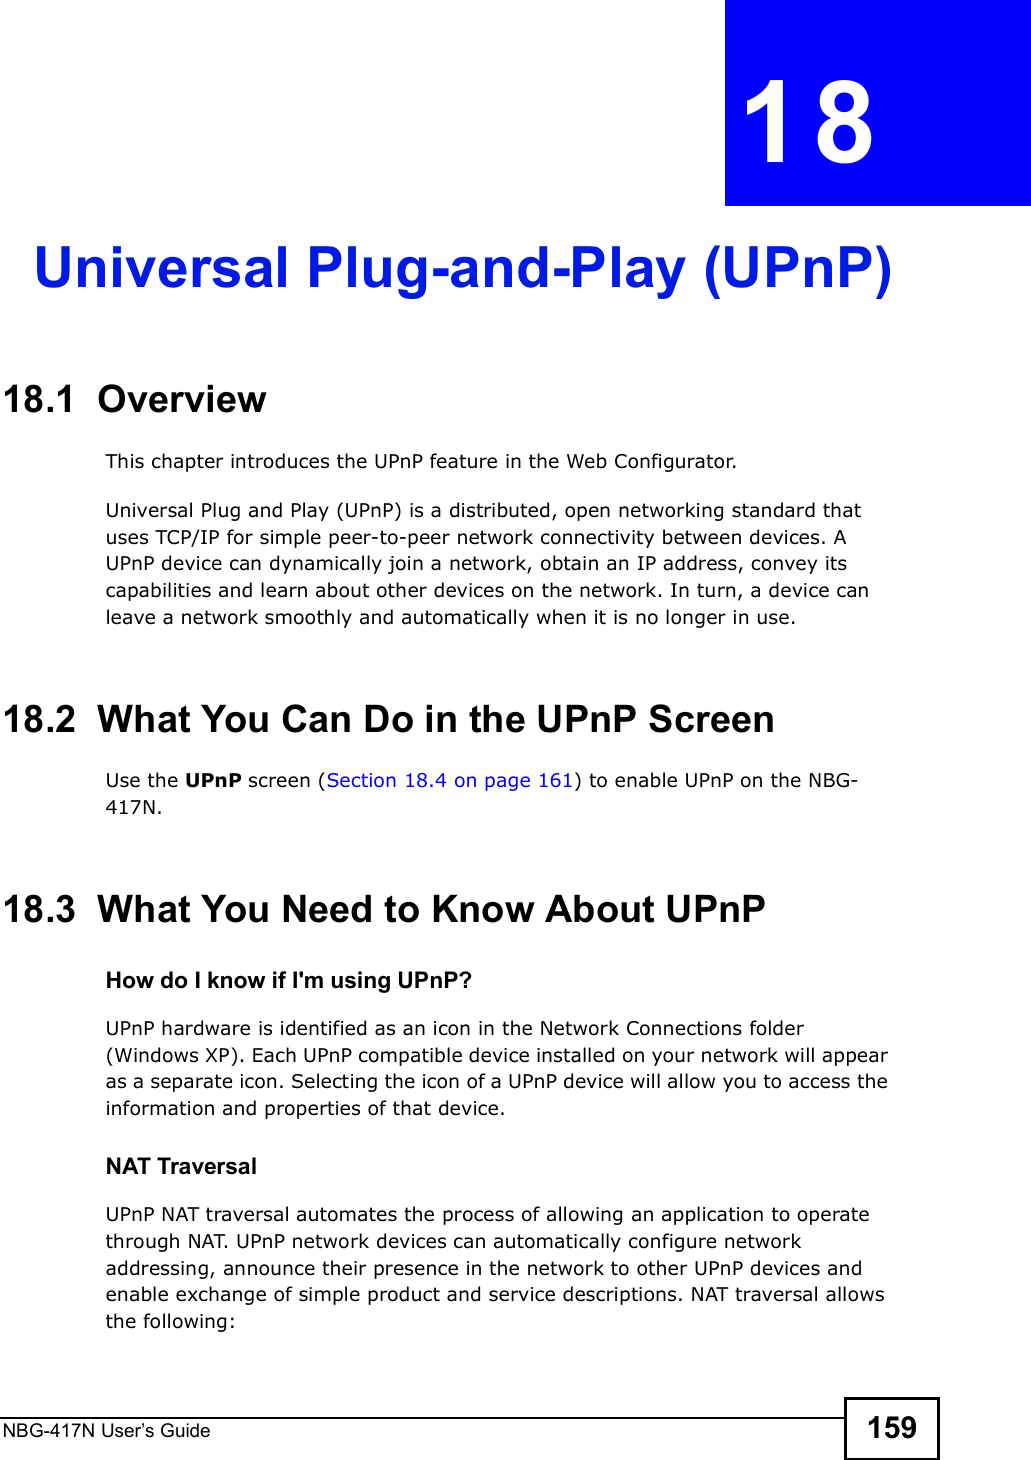 NBG-417N User s Guide 159CHAPTER  18 Universal Plug-and-Play (UPnP)18.1  Overview This chapter introduces the UPnP feature in the Web Configurator.Universal Plug and Play (UPnP) is a distributed, open networking standard that uses TCP/IP for simple peer-to-peer network connectivity between devices. A UPnP device can dynamically join a network, obtain an IP address, convey its capabilities and learn about other devices on the network. In turn, a device can leave a network smoothly and automatically when it is no longer in use.18.2  What You Can Do in the UPnP ScreenUse the UPnP screen (Section 18.4 on page 161) to enable UPnP on the NBG-417N.18.3  What You Need to Know About UPnPHow do I know if I&apos;m using UPnP? UPnP hardware is identified as an icon in the Network Connections folder (Windows XP). Each UPnP compatible device installed on your network will appear as a separate icon. Selecting the icon of a UPnP device will allow you to access the information and properties of that device. NAT TraversalUPnP NAT traversal automates the process of allowing an application to operate through NAT. UPnP network devices can automatically configure network addressing, announce their presence in the network to other UPnP devices and enable exchange of simple product and service descriptions. NAT traversal allows the following: